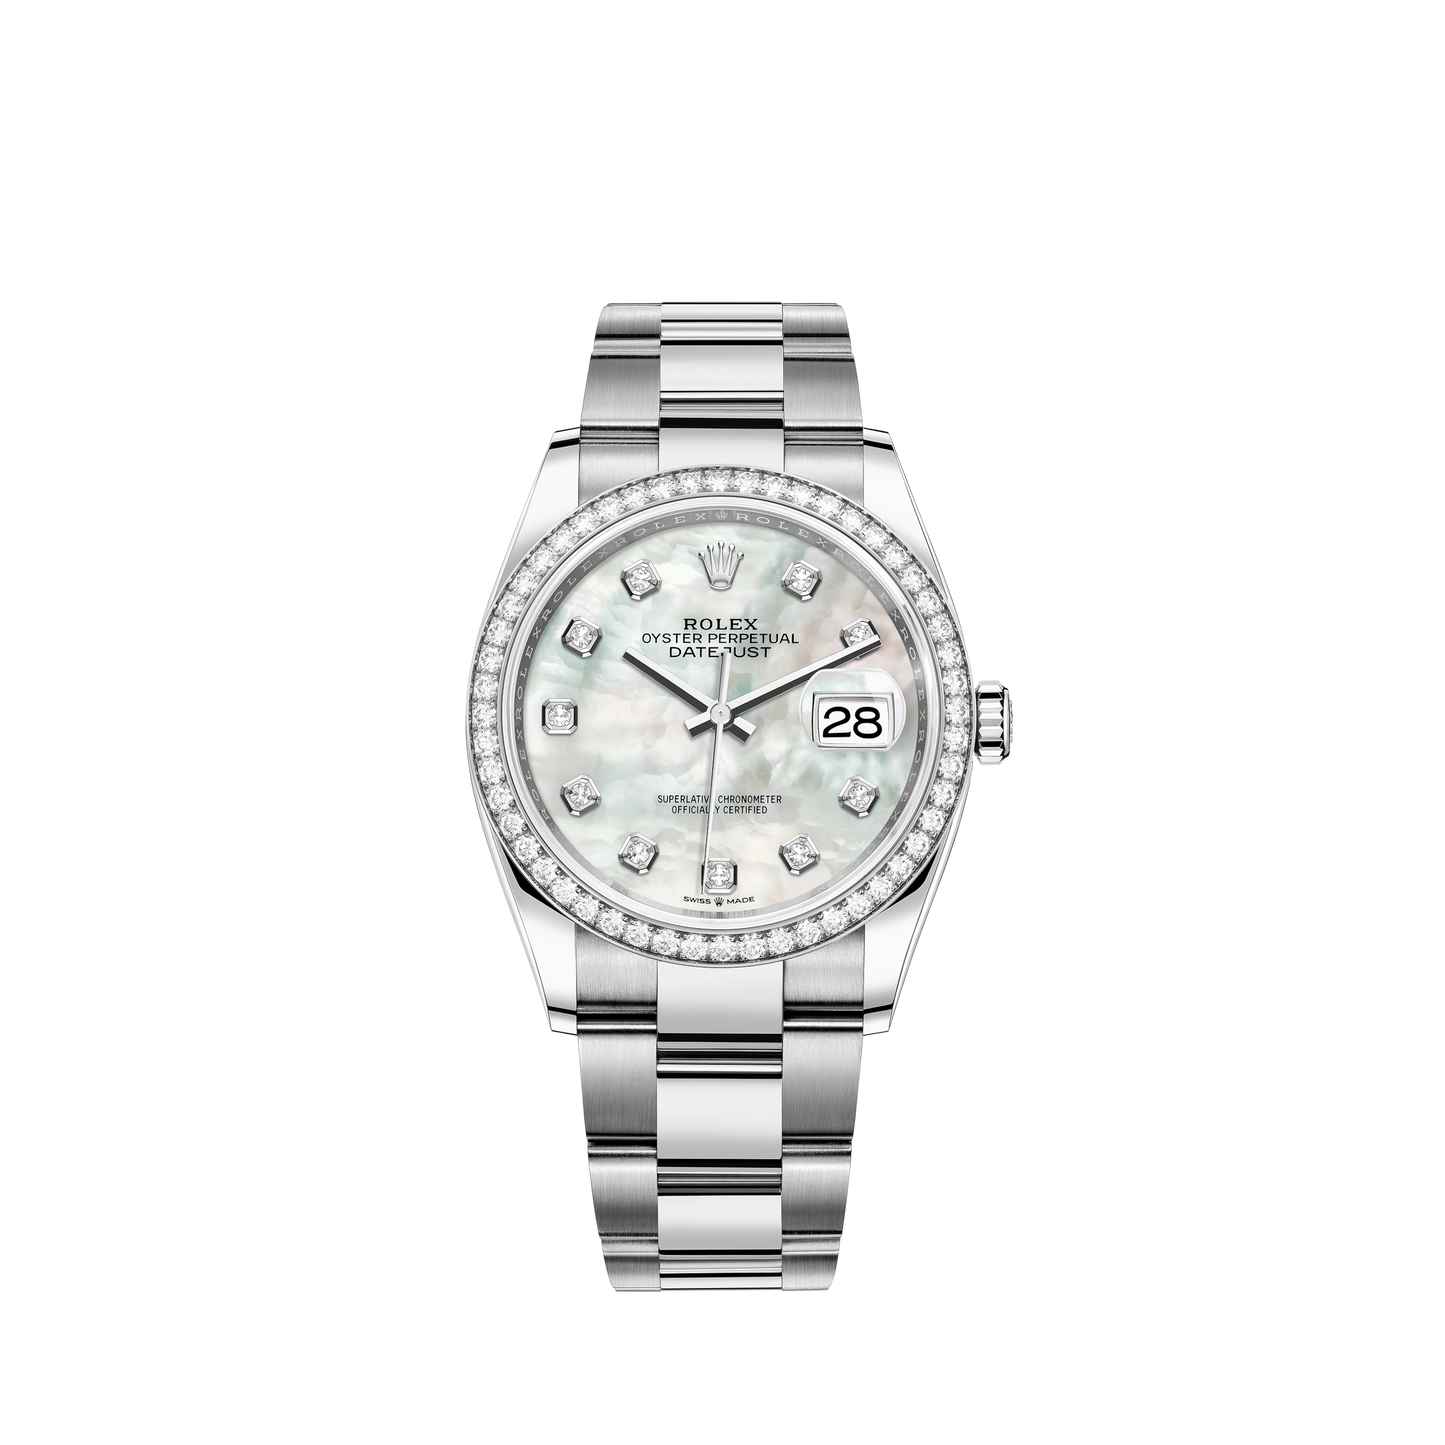 Datejust 36 36mm Oystersteel and White Gold Oyster Bracelet White Mother-of-Pearl Diamond-set Dial Diamond-set Bezel